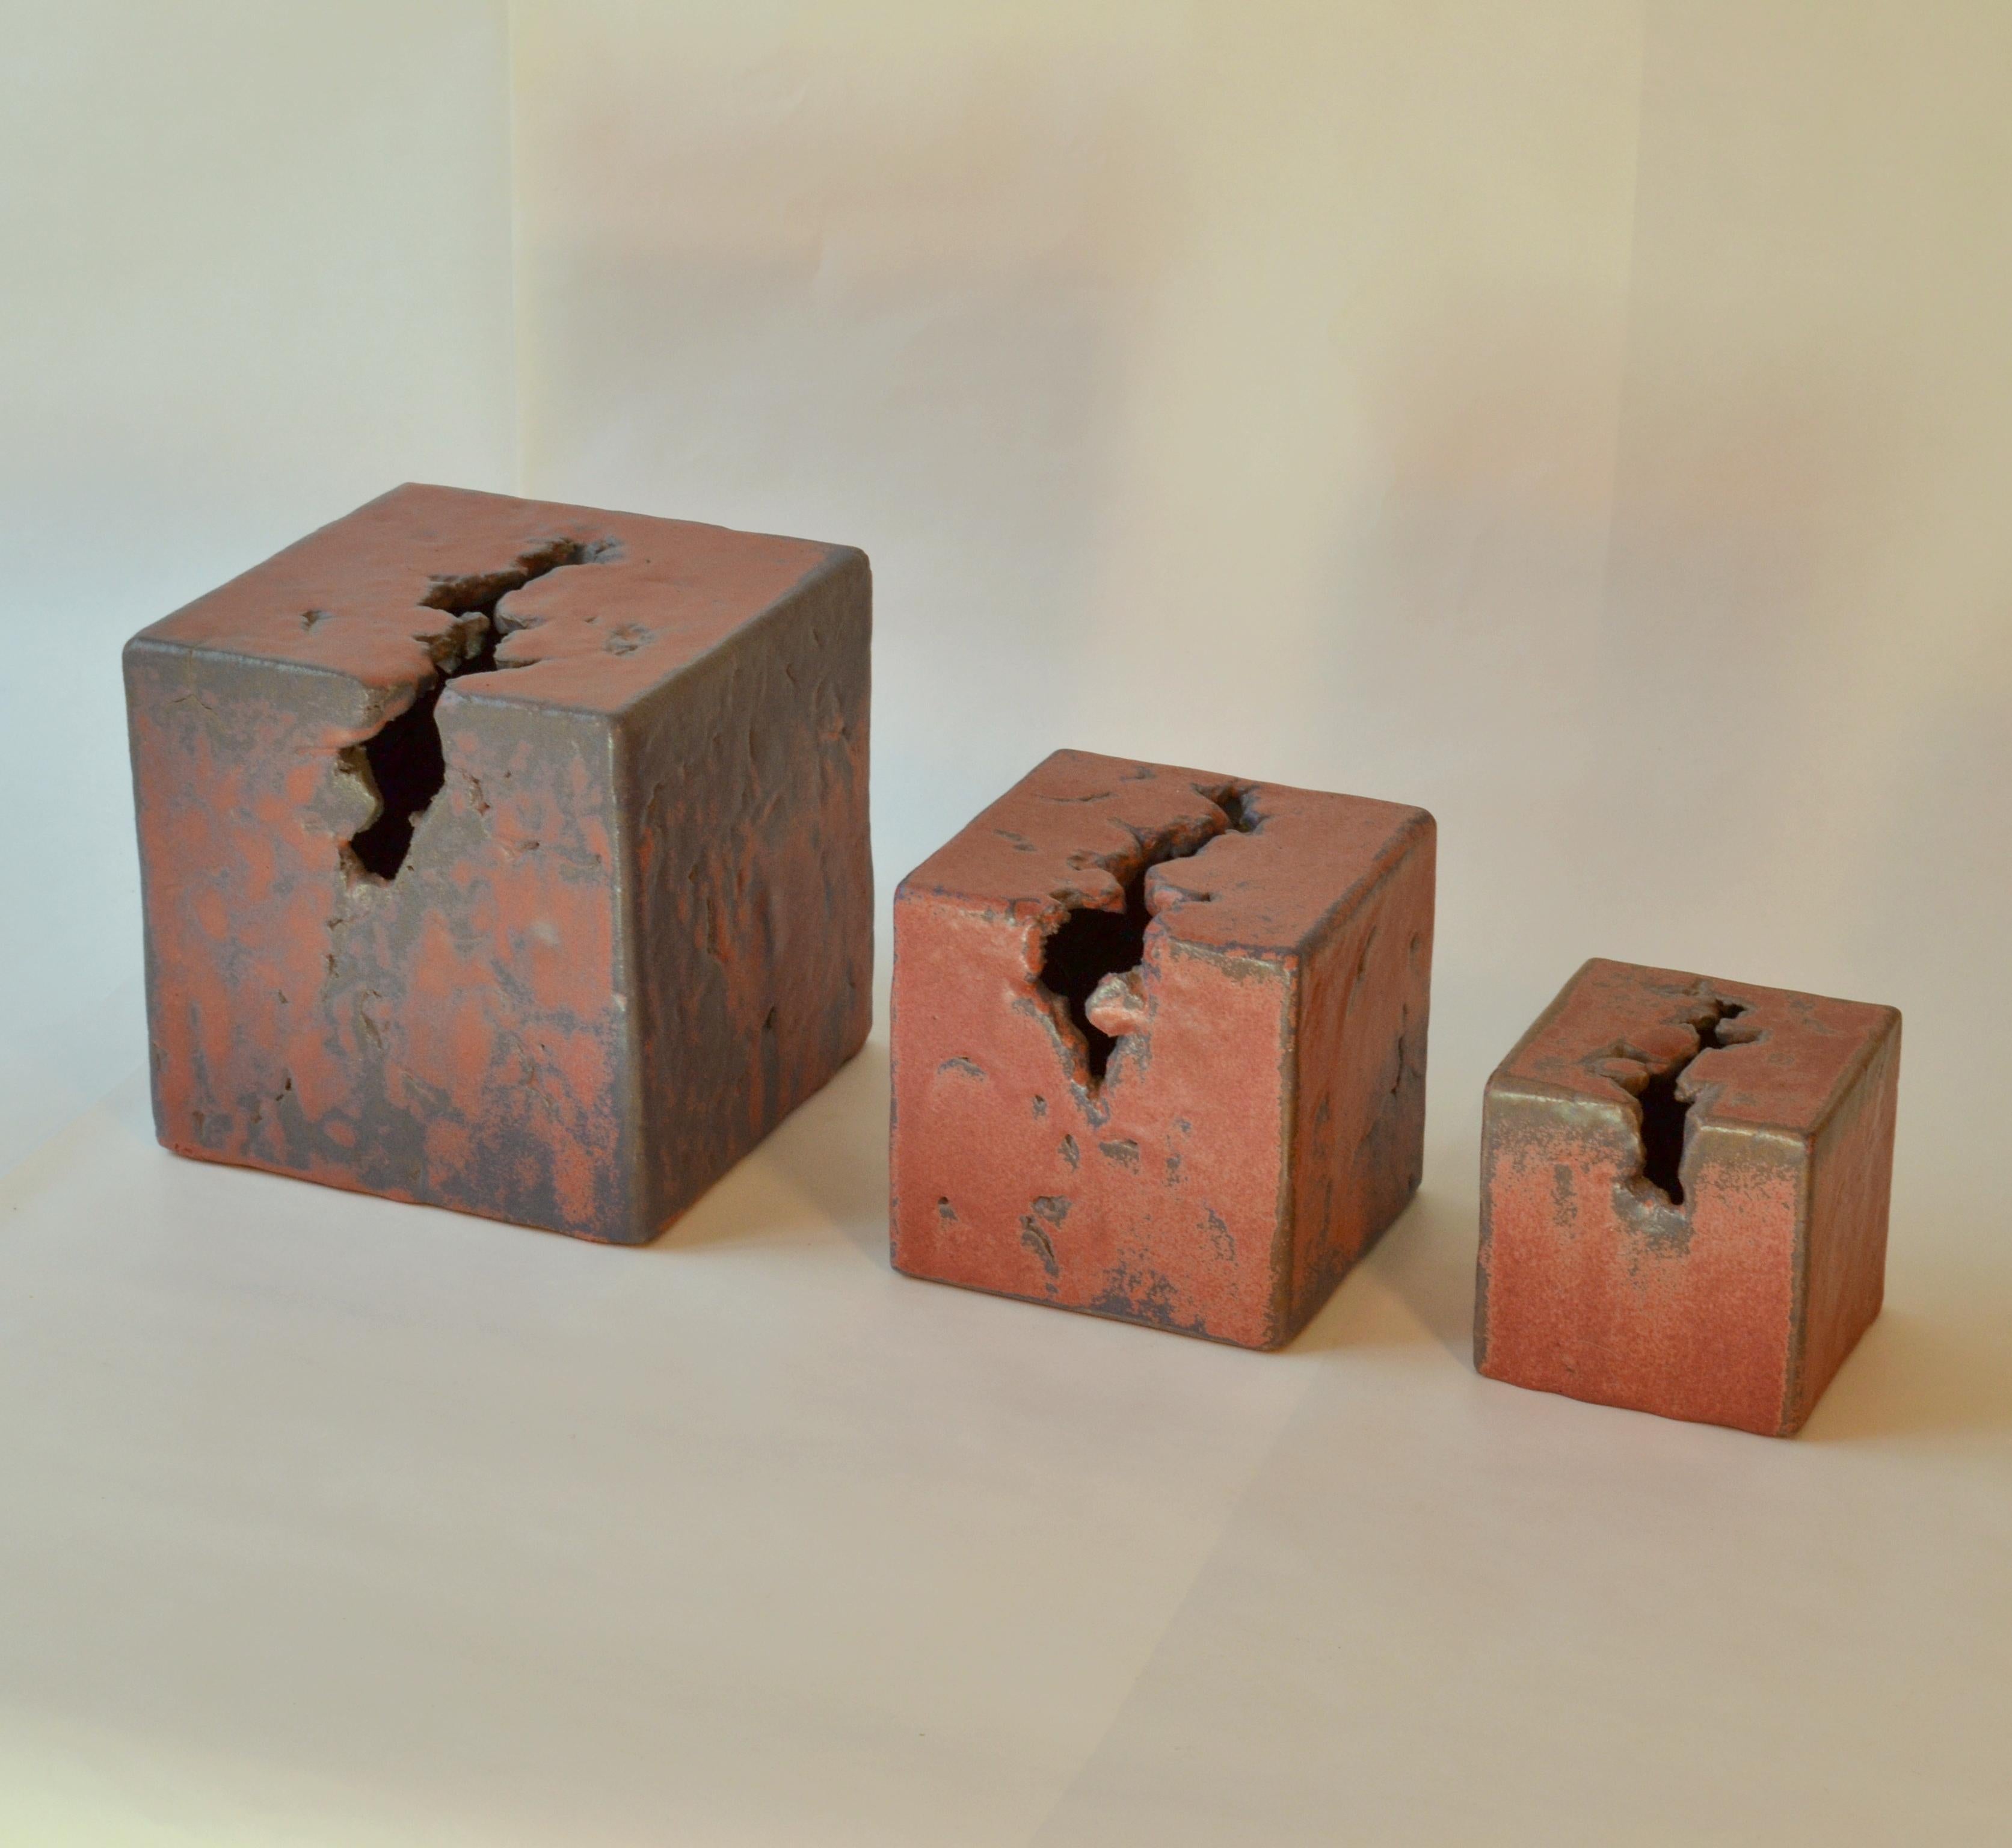 A set of three unique hand formed ceramic sculptures of cubes with crater formed openings on two planes by Mobach Studio in the Netherlands in the 1980's. Mobach ceramics are produced by the best potters in Dutch 20th century history. The mauve and